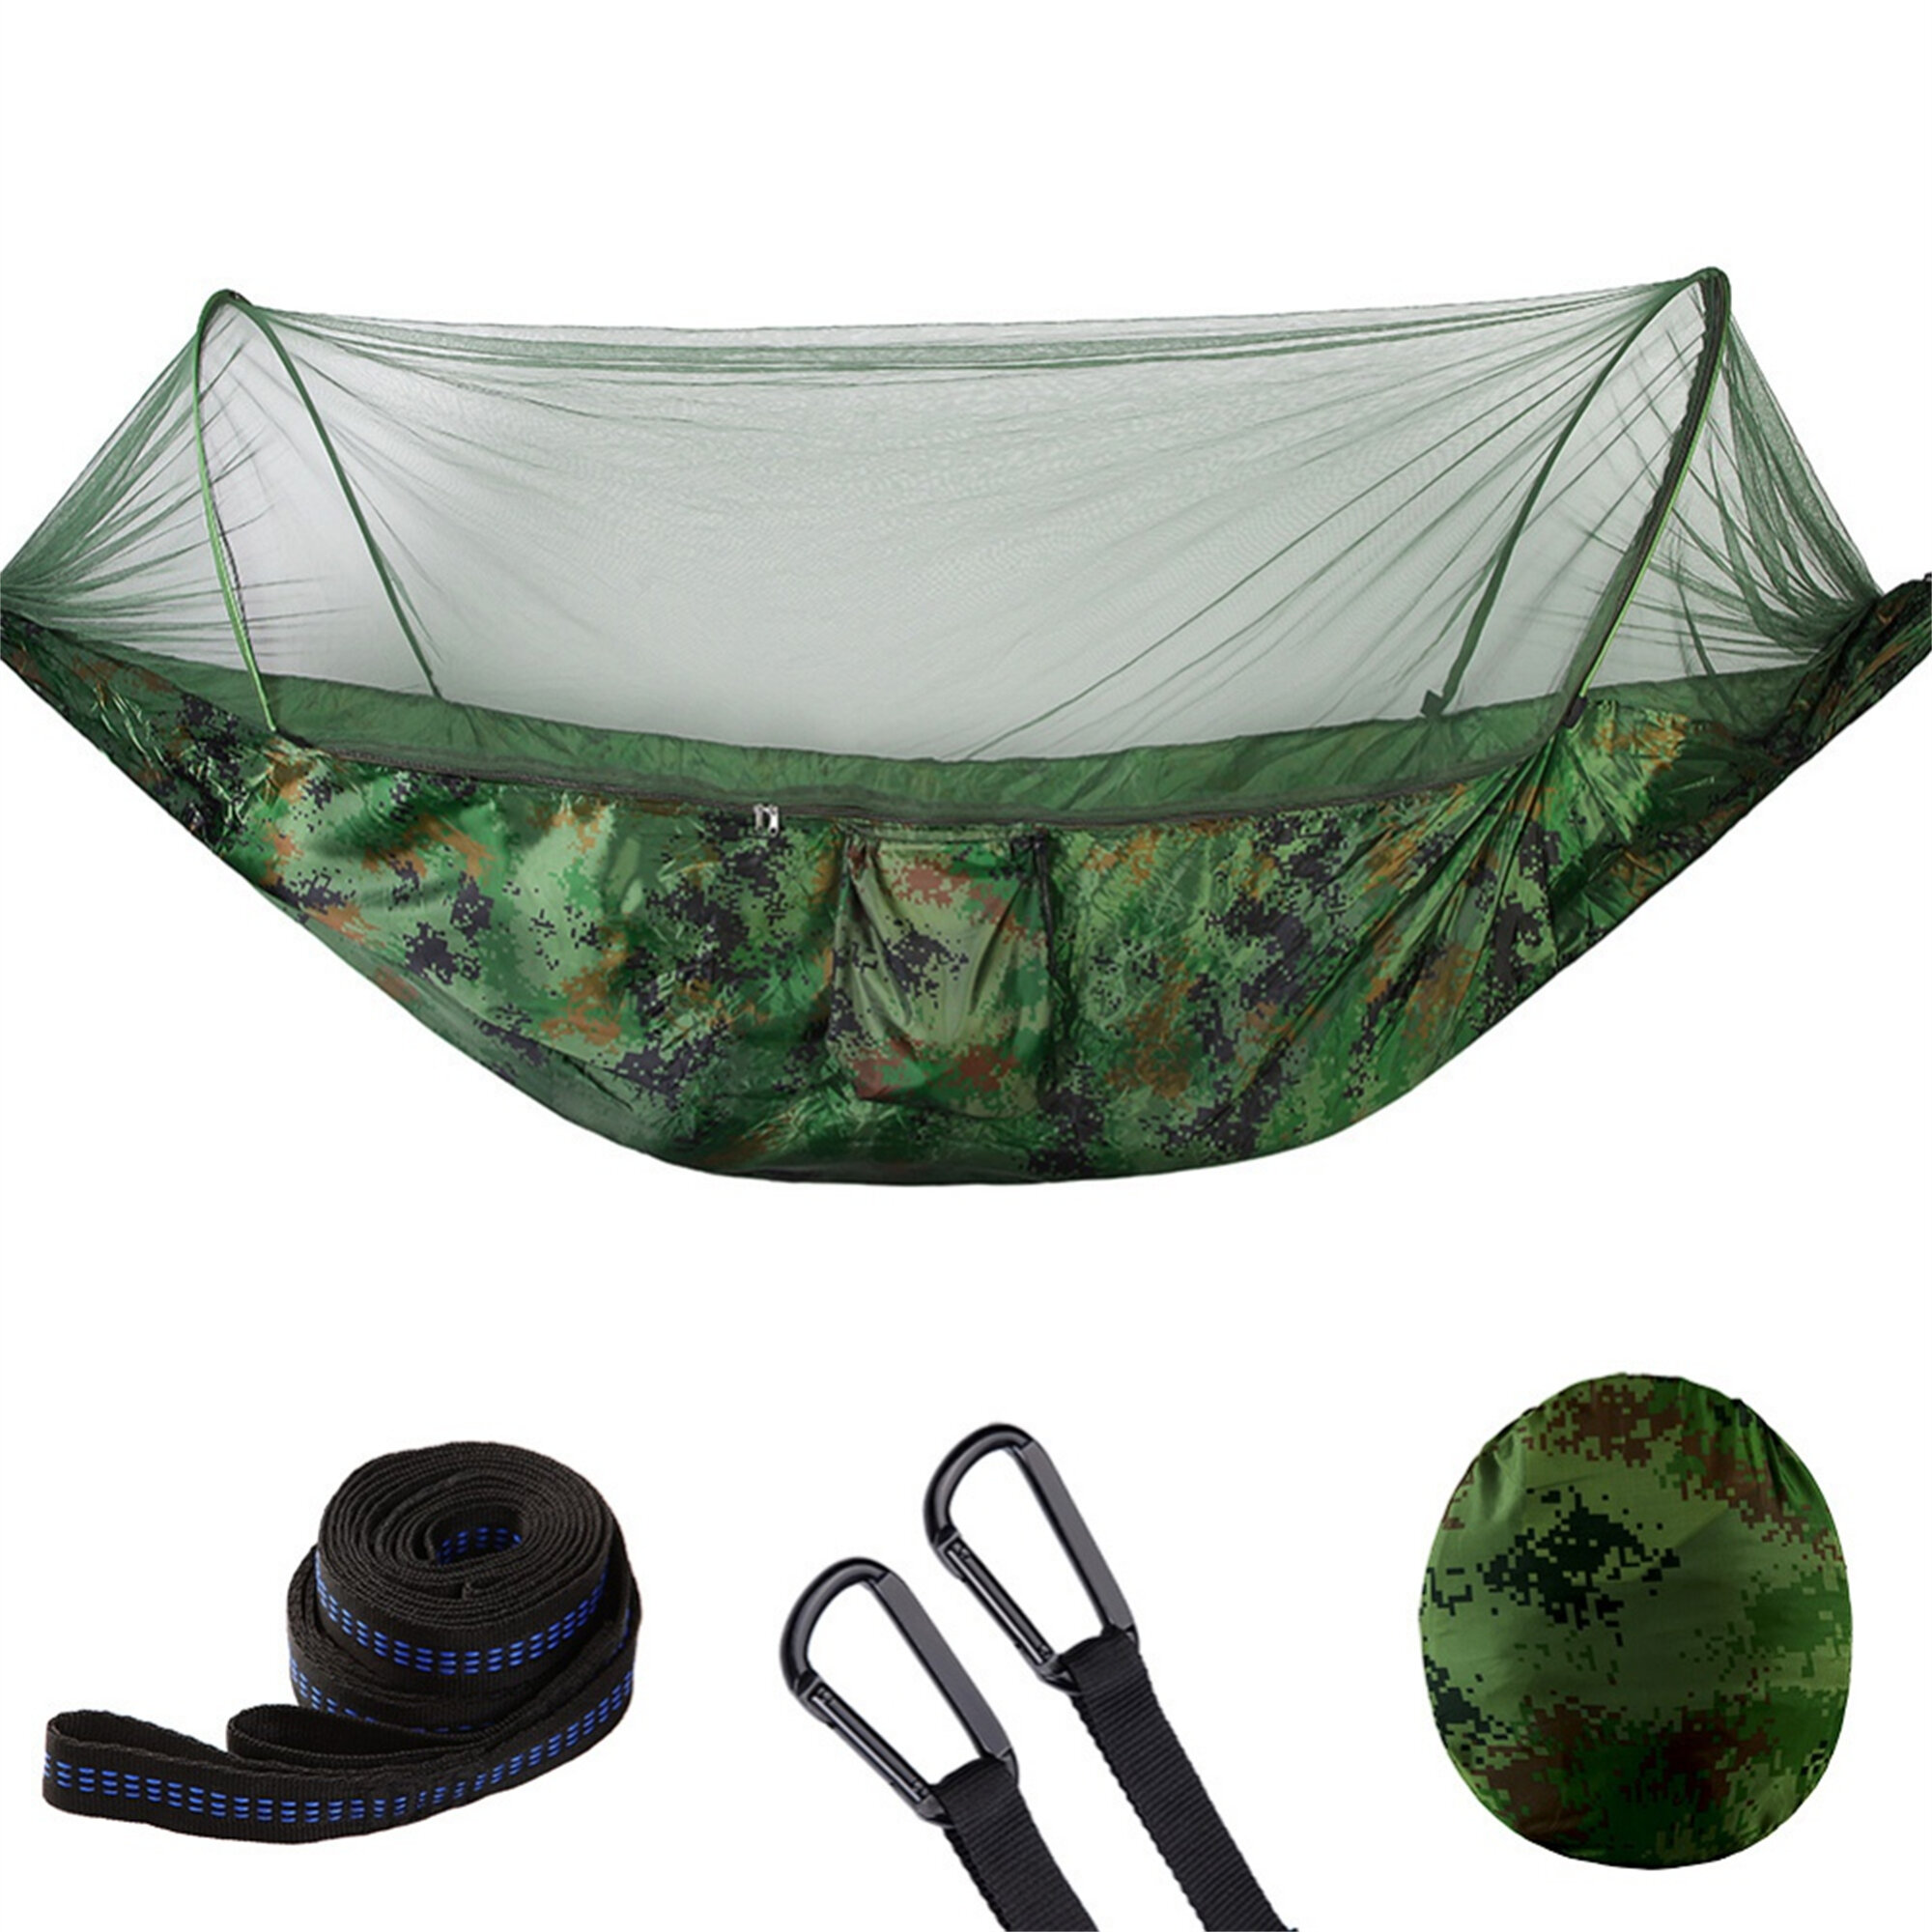 Travel Outdoor Camping Mosquito Net for Tent Hanging Hammock Bed 